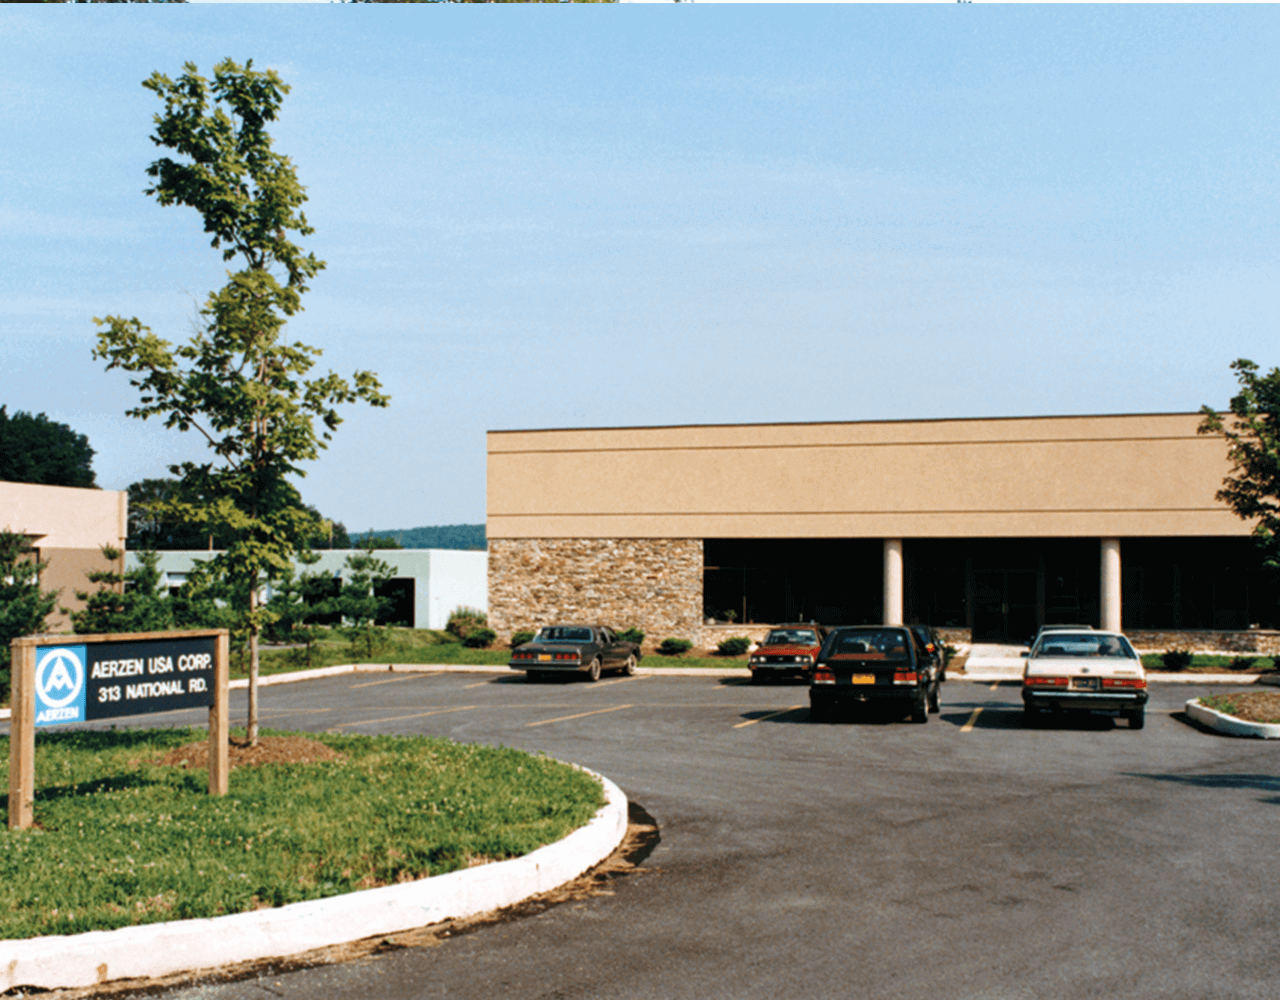 Picture of the building of the subsidiaries Aerzen USA Corporation